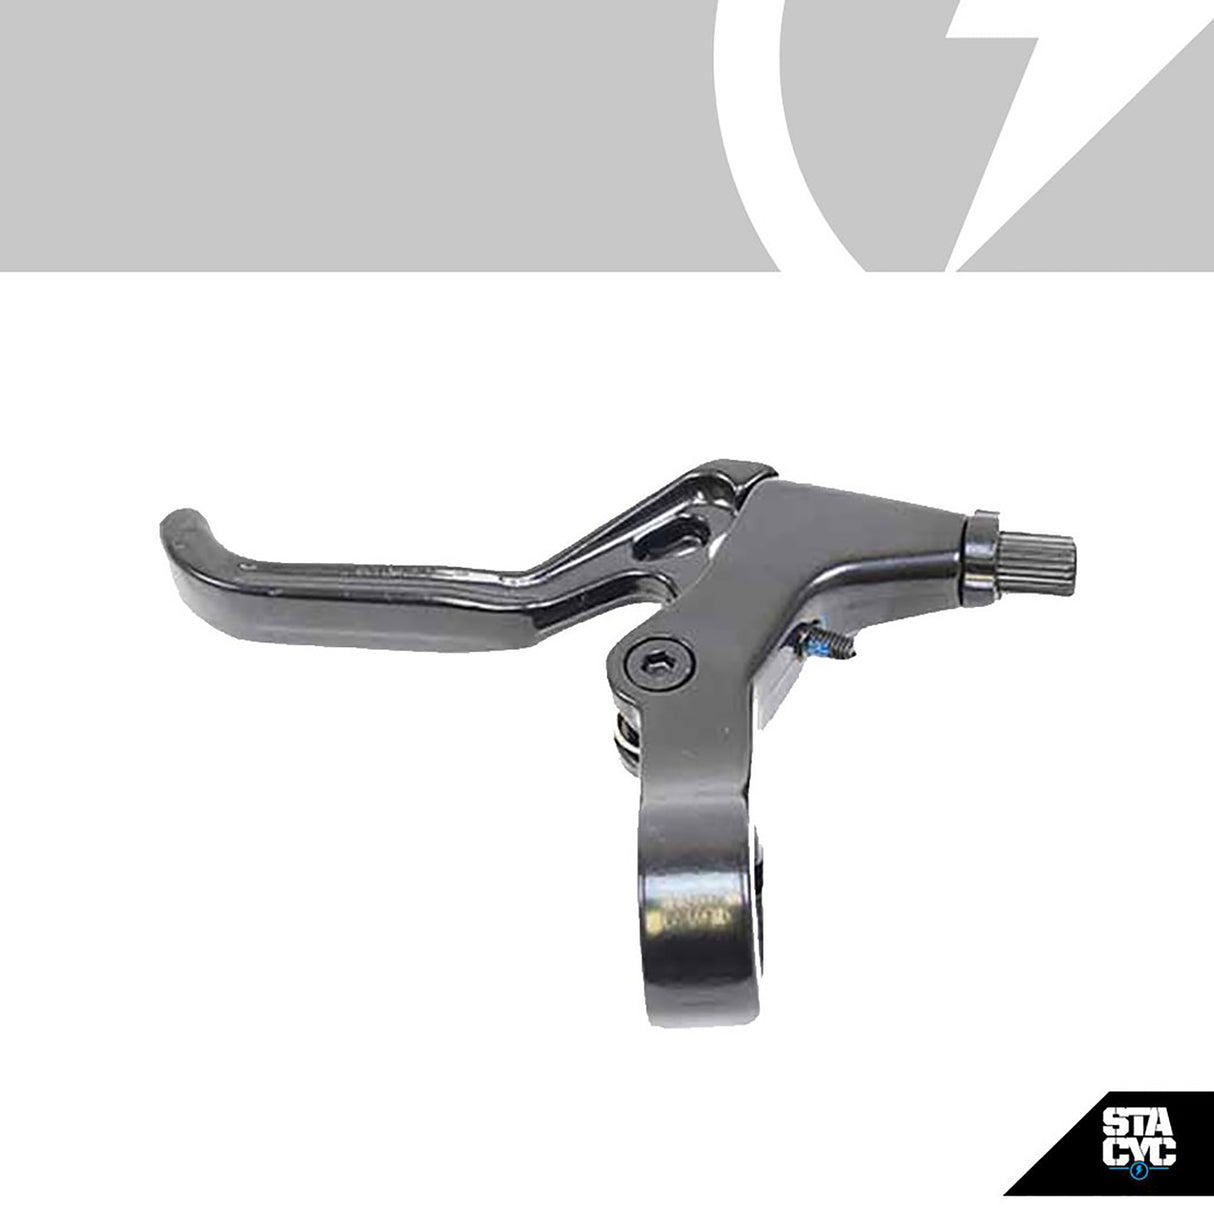 STACYC REPLACEMENT BRAKE LEVER